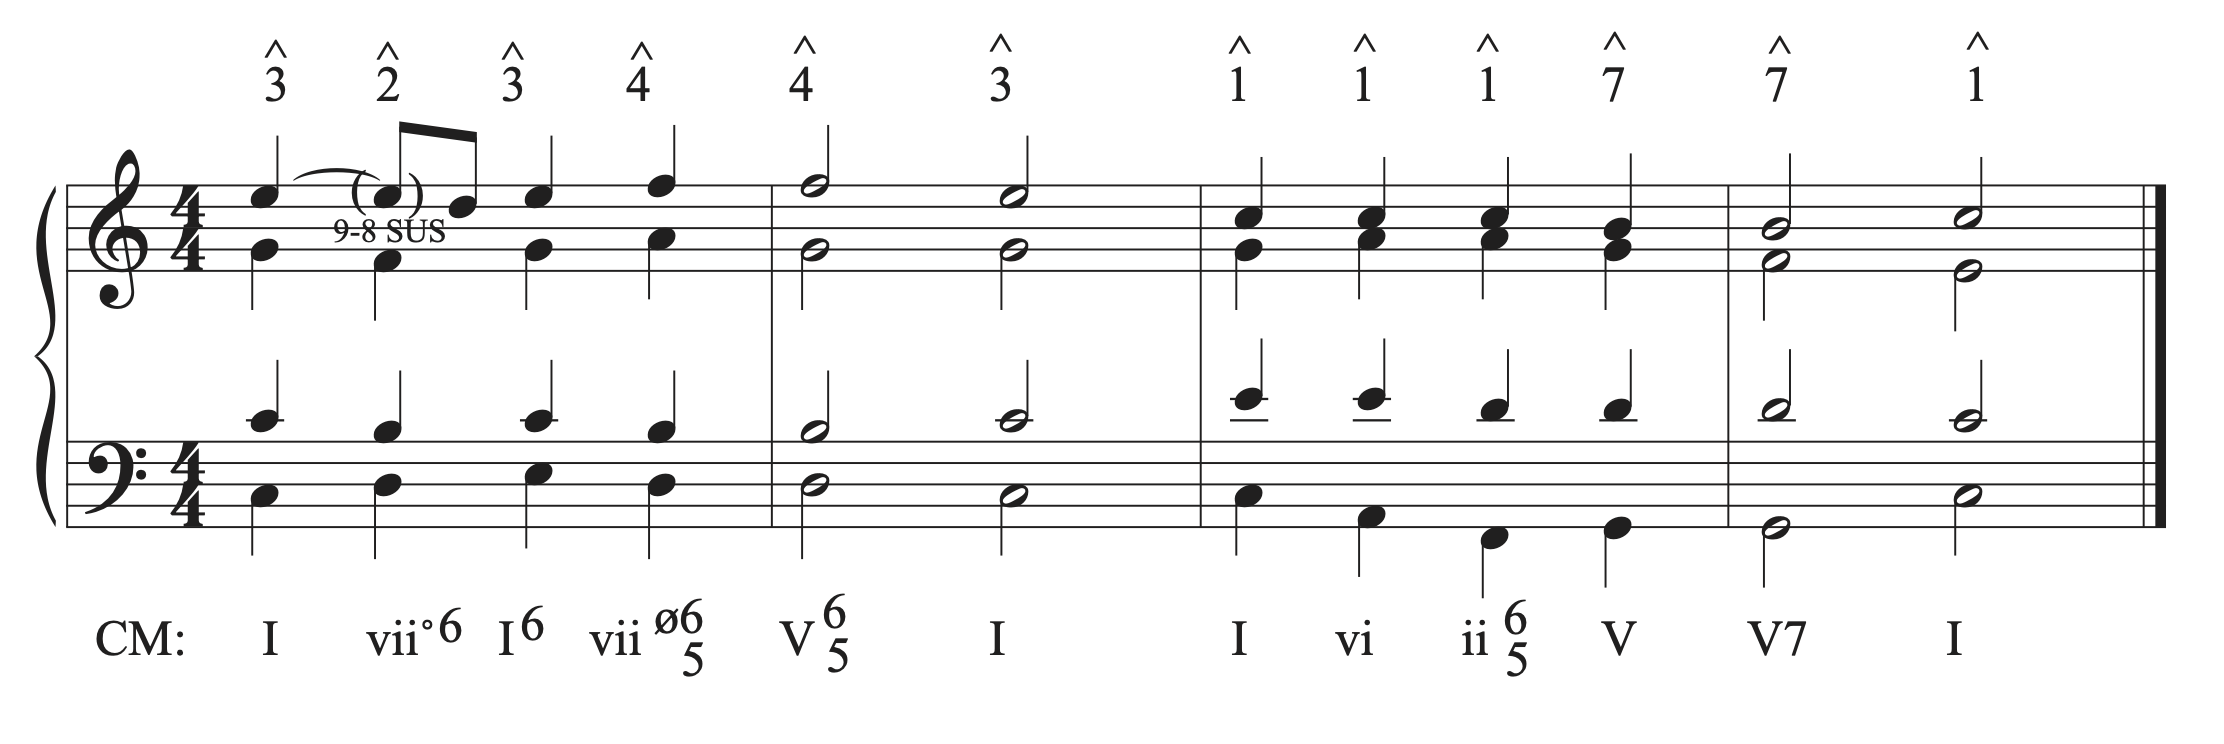 The musical example in C major with a 9-8 suspension added.